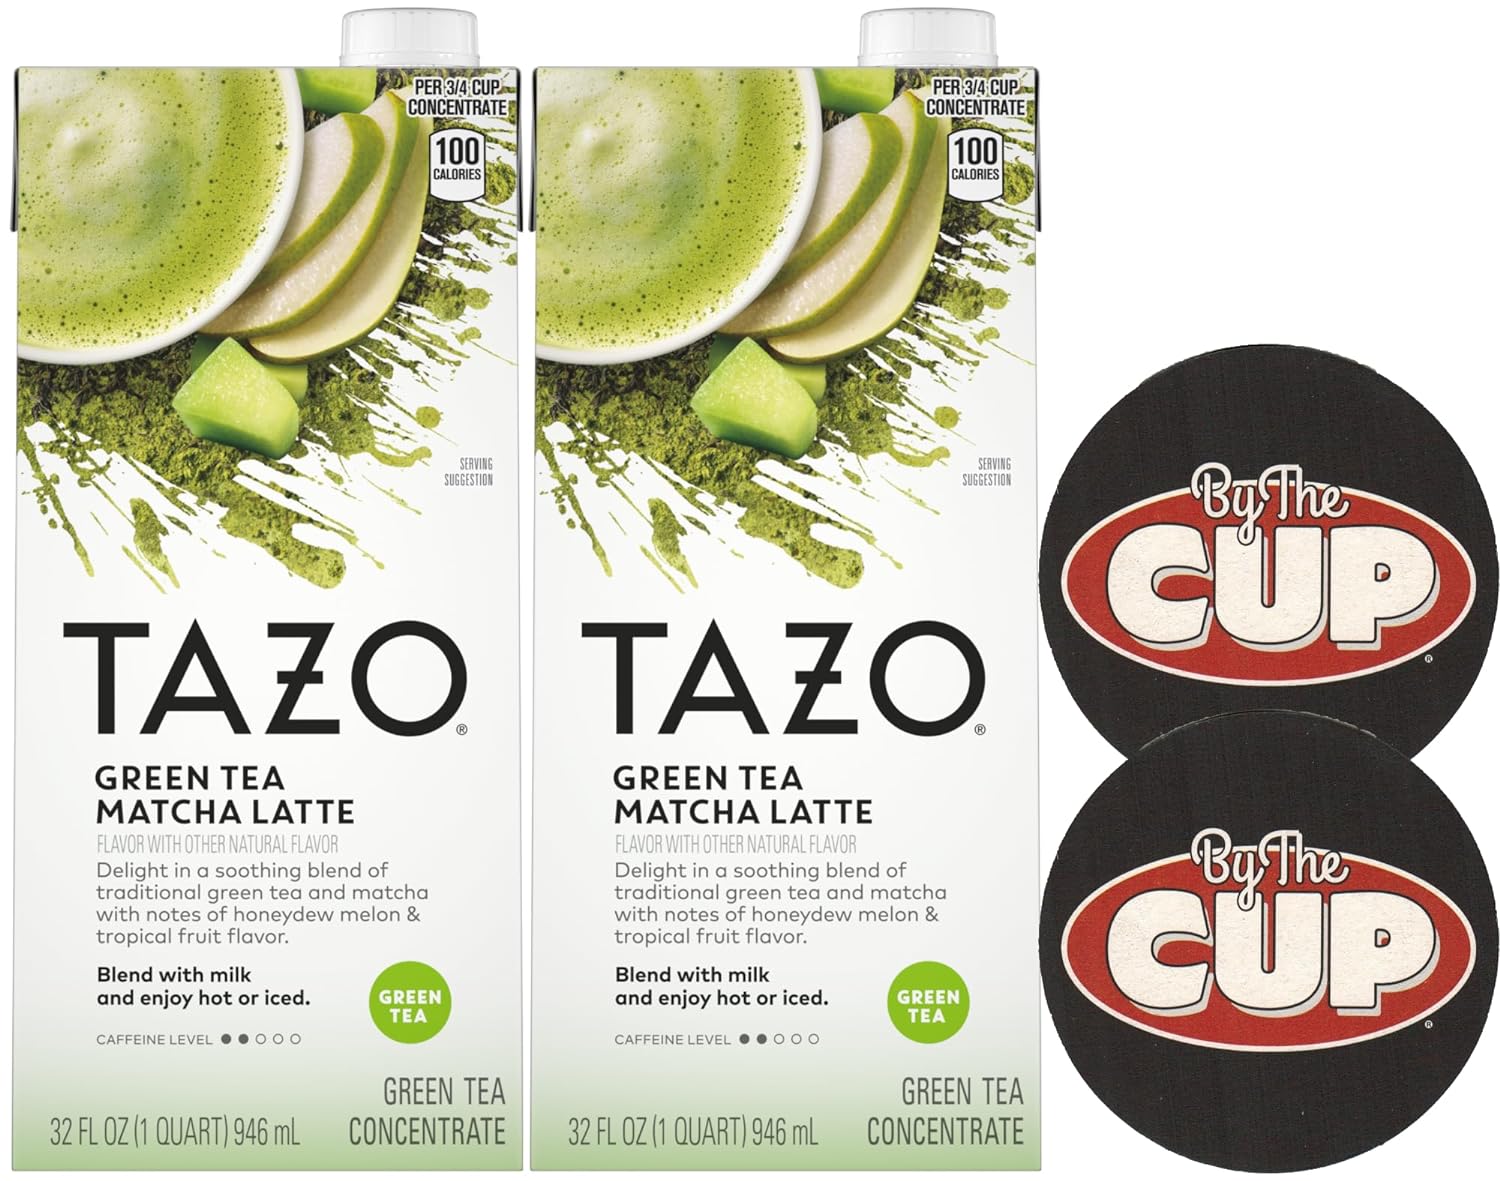 TAZO Green Tea Matcha Latte Concentrate, 32 oz (Pack of 2) with By The Cup Coasters